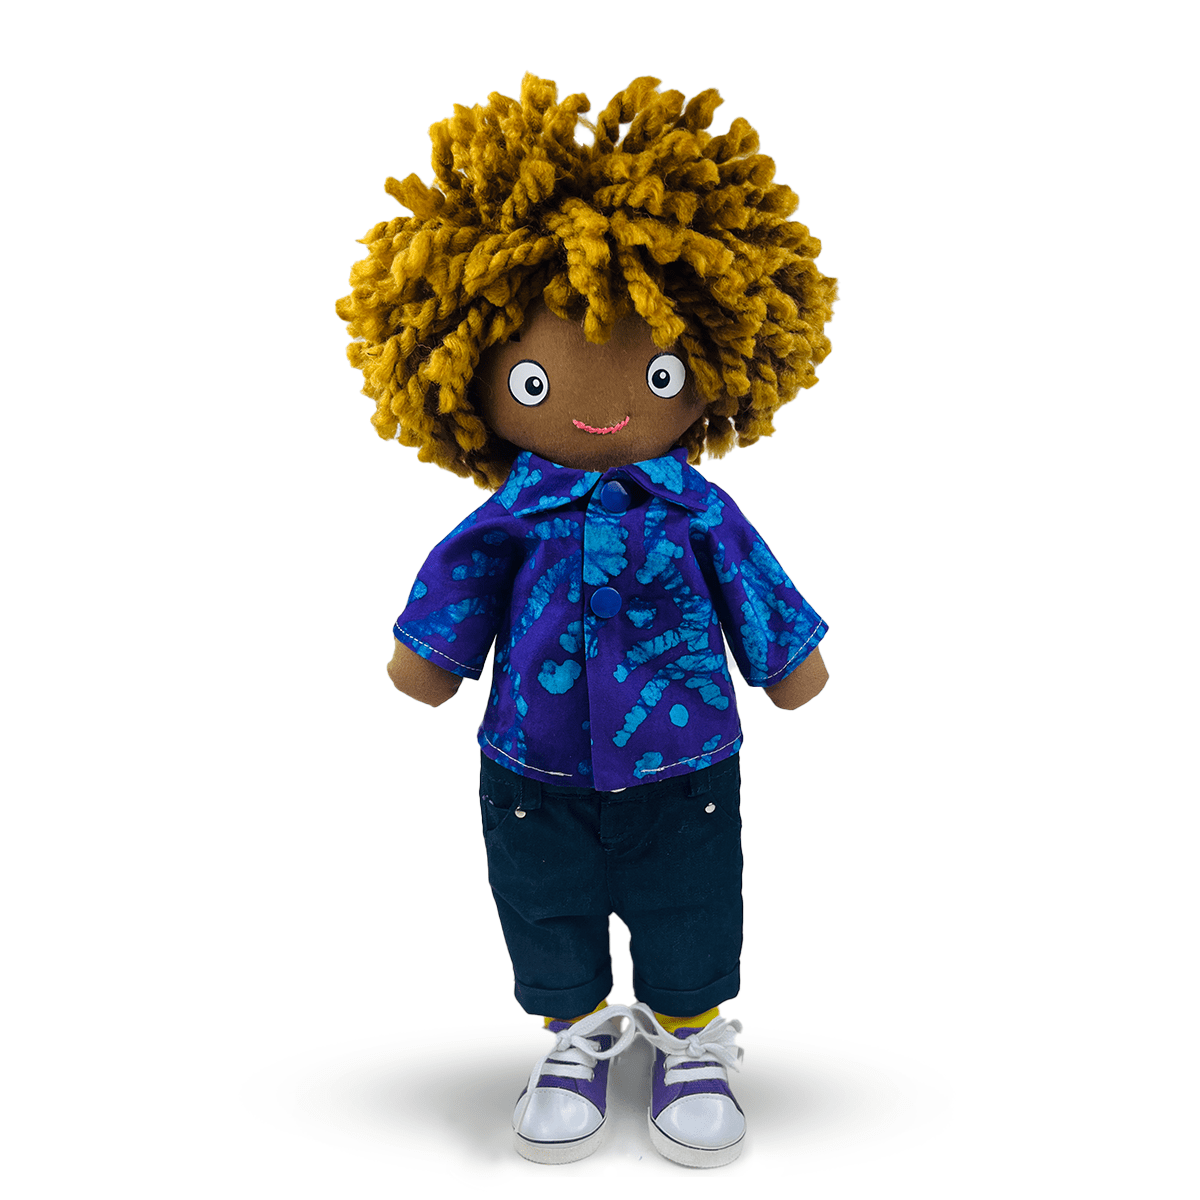 Black Dolls Matter® promotes the representation of children of color through its diverse selection of dolls., WELCOME, BLACK DOLLS MATTER